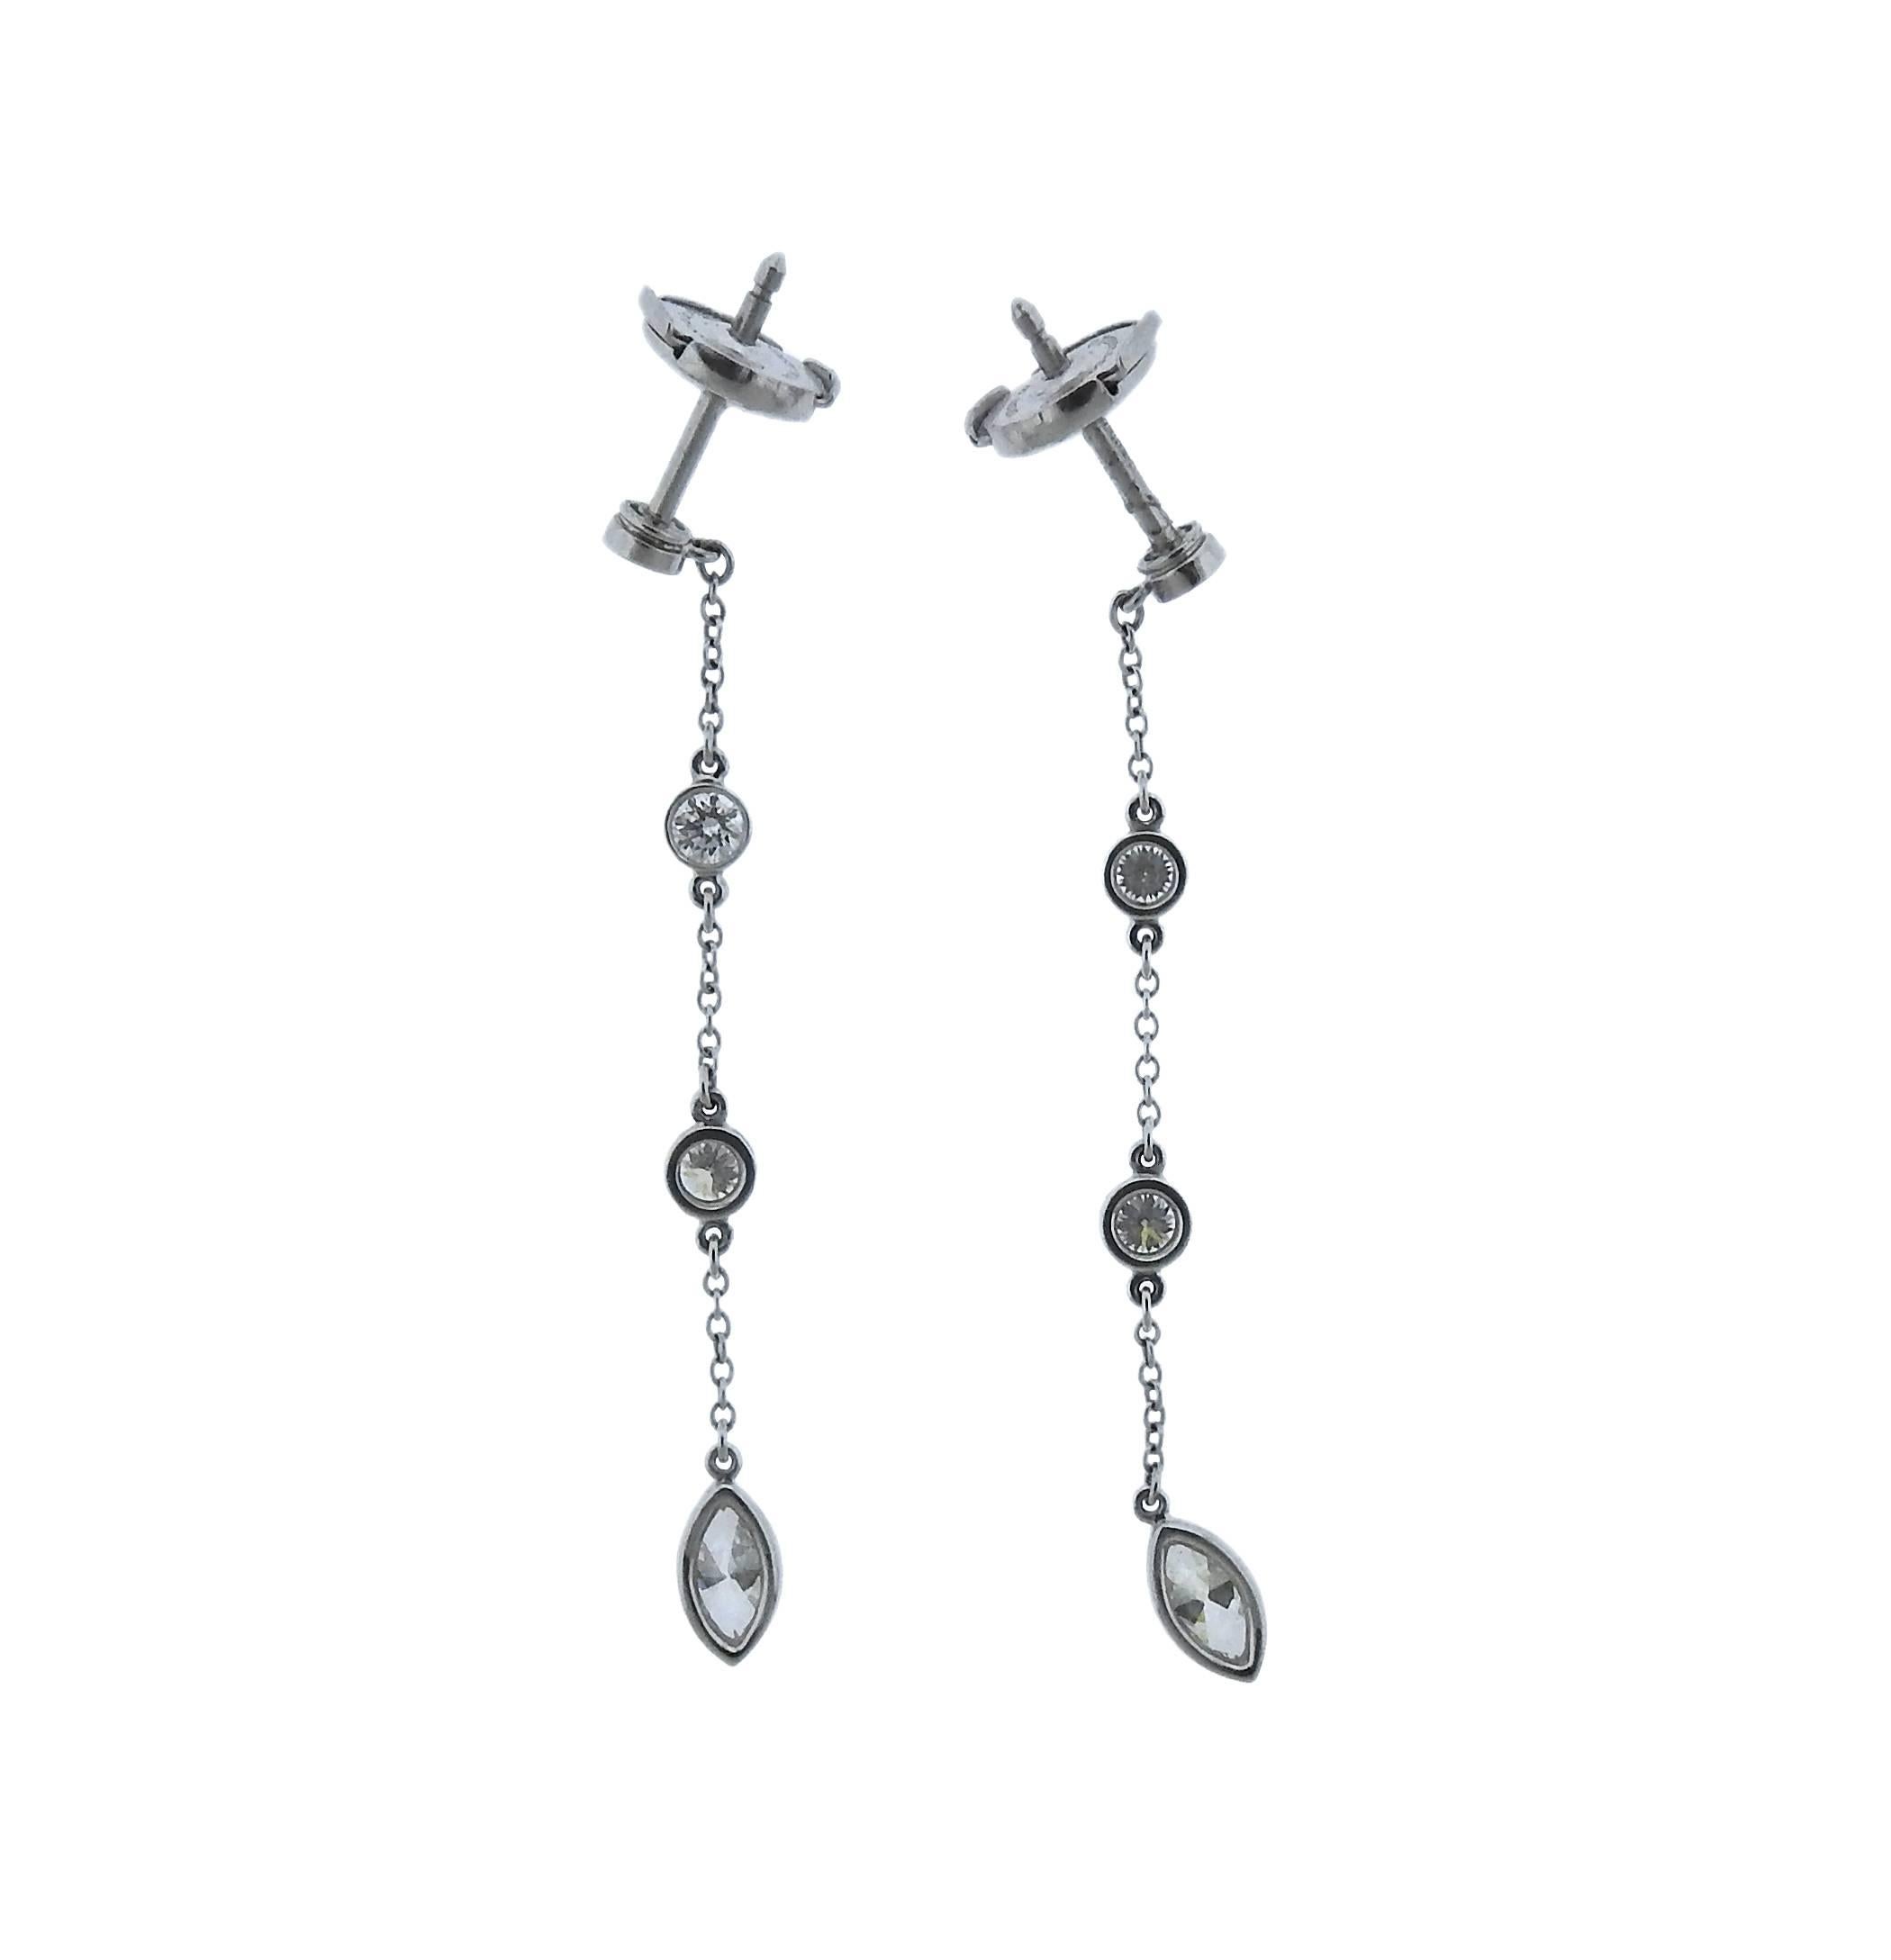 Tiffany & Co. platinum and diamond earrings from the Jazz collection. Earrings are decorated with approximately 0.81ctw of diamonds. Retail for $5,400. Weight: 4.0g